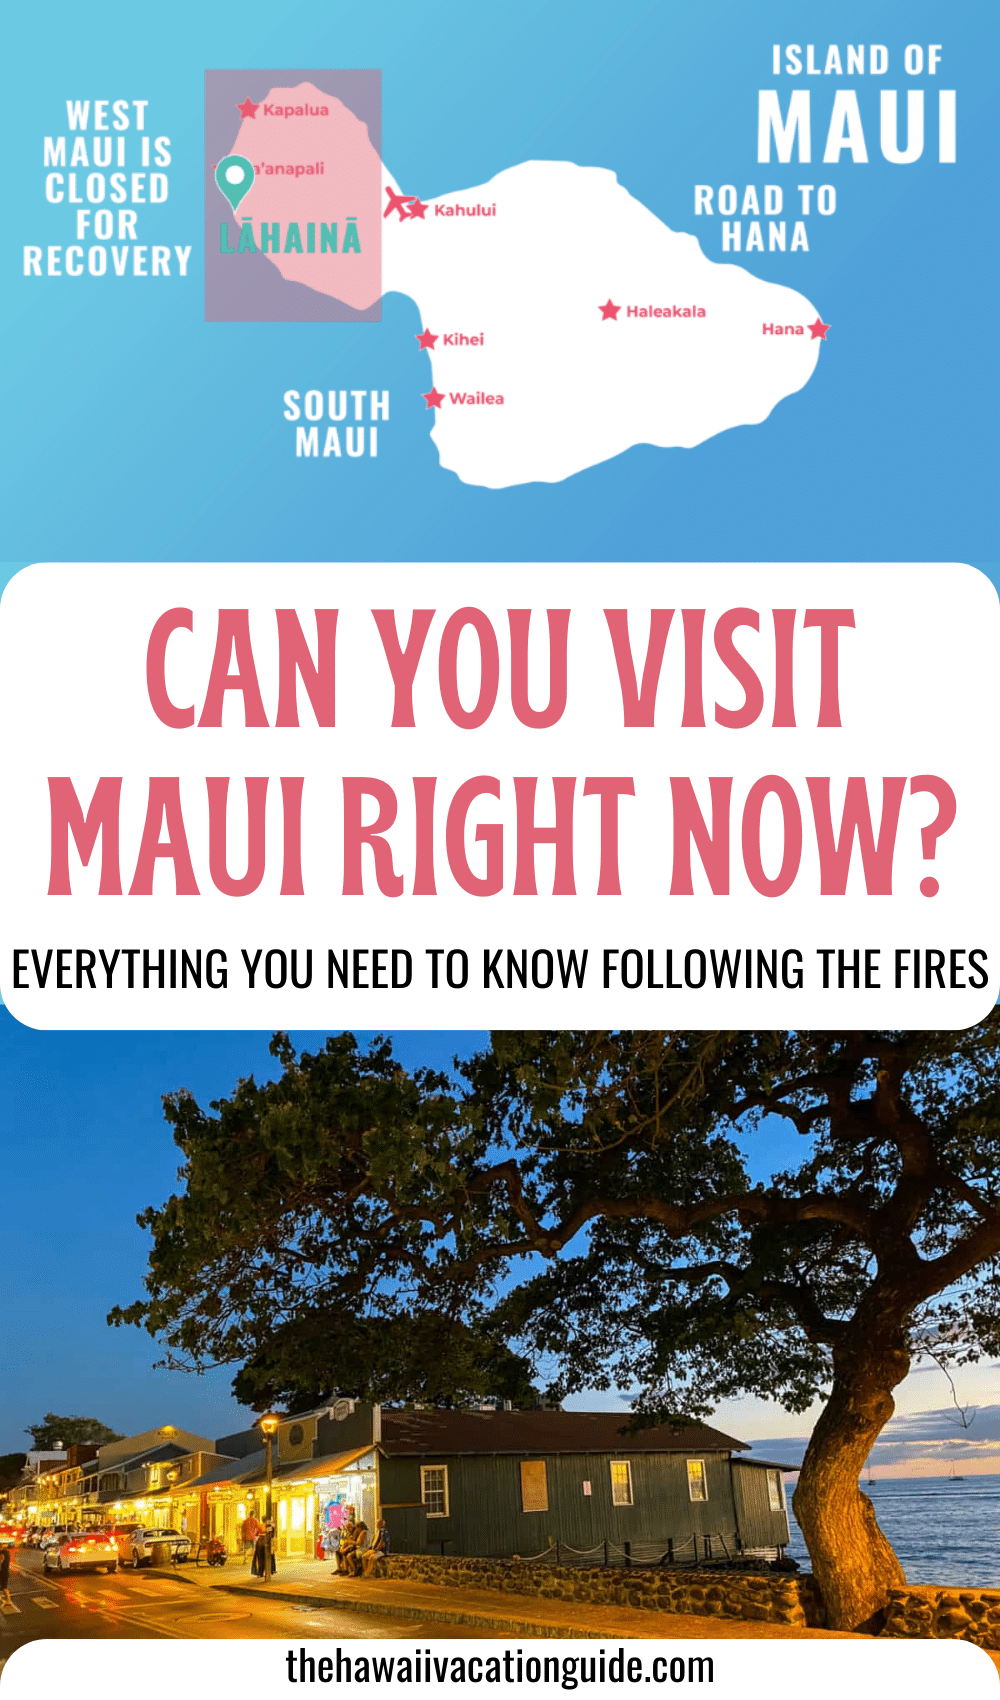 Pinterest Image: Can you visit Maui right now? Everything you need to know following the fires